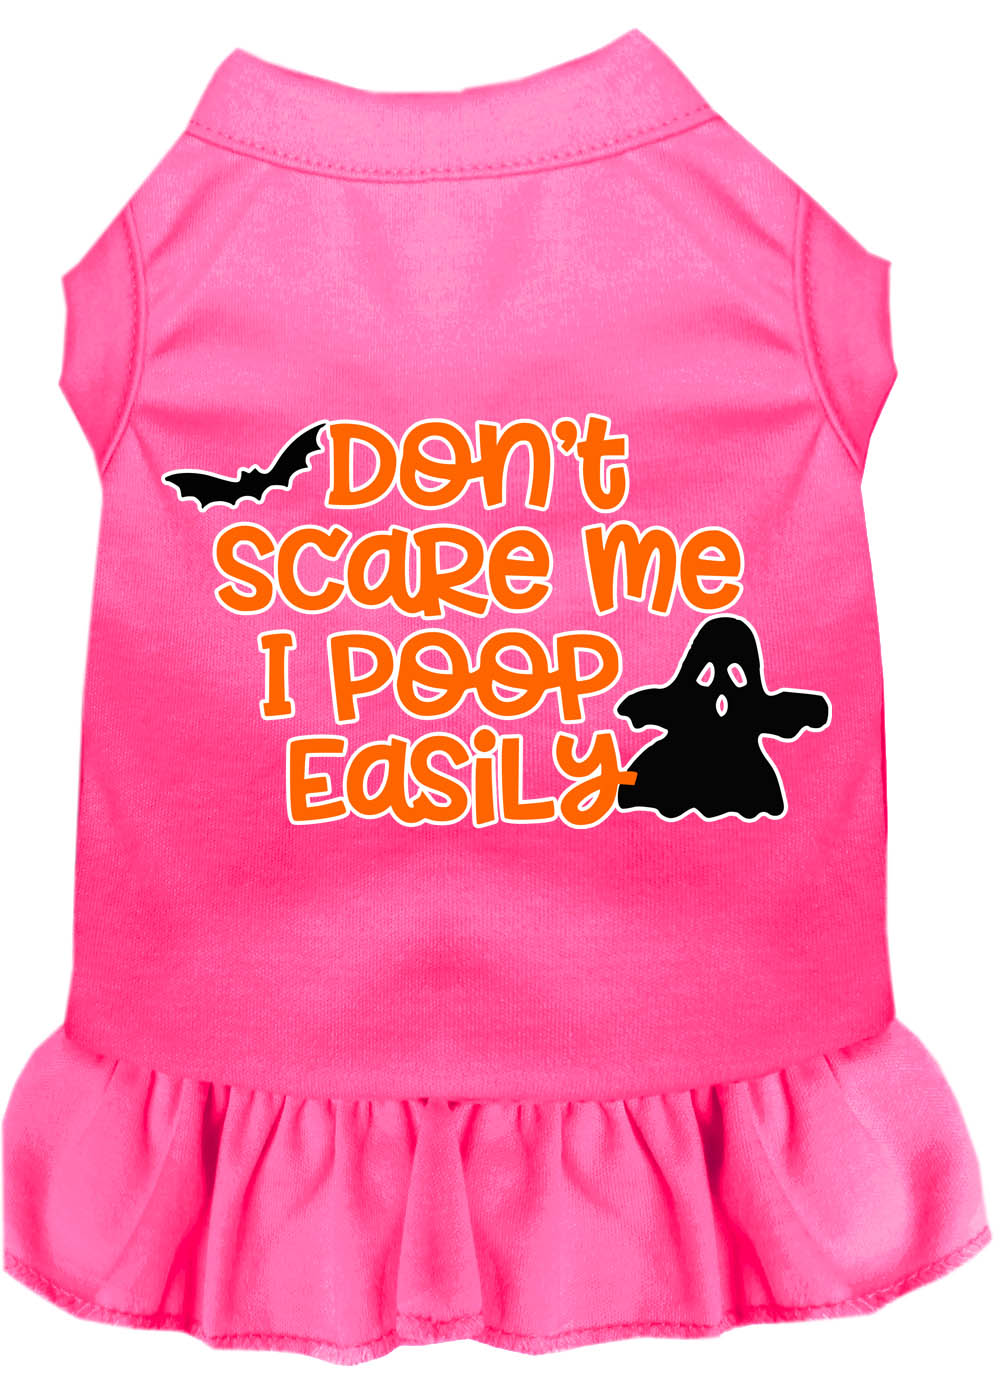 Don't Scare Me, Poops Easily Screen Print Dog Dress Bright Pink XL